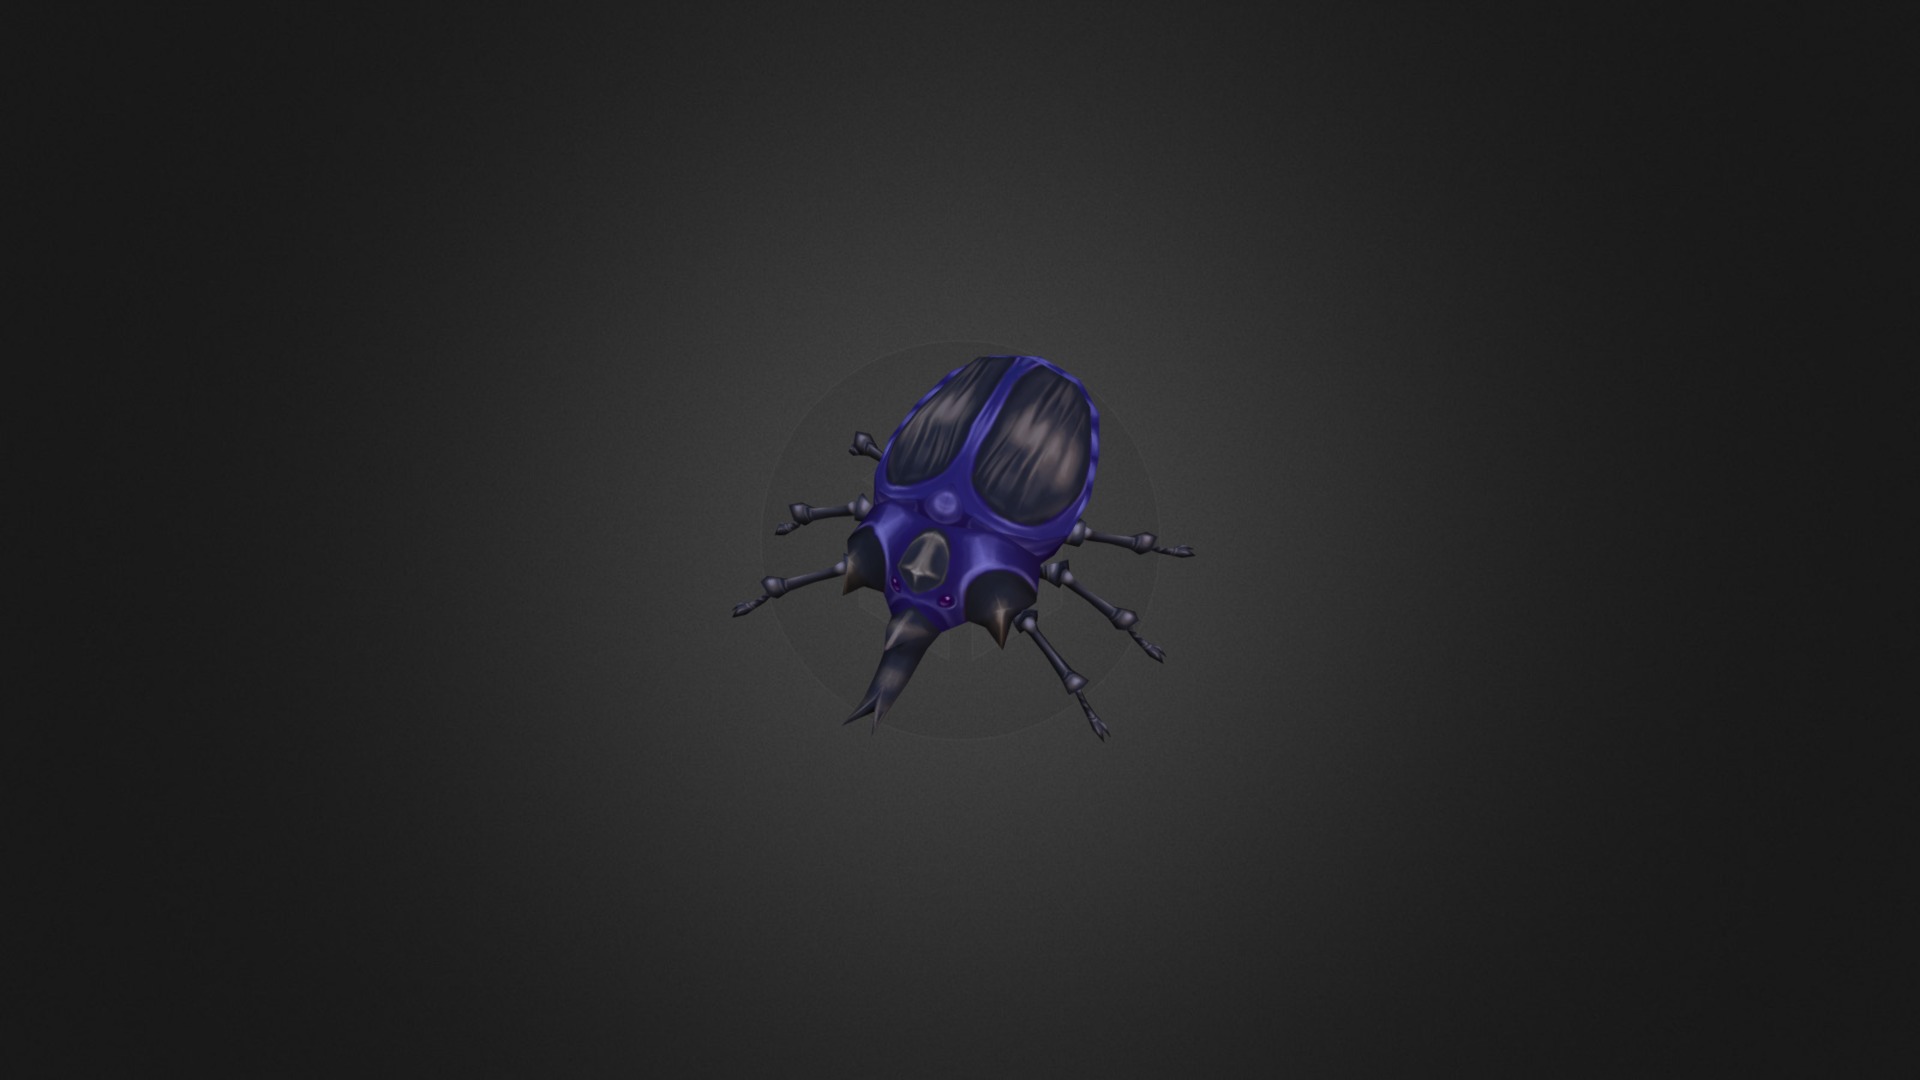 Fixed animation, 908 tris, 16 animation clips -link removed- - Low Poly Rhino Beetle V1.02 - 3D model by nnj3de 3d model